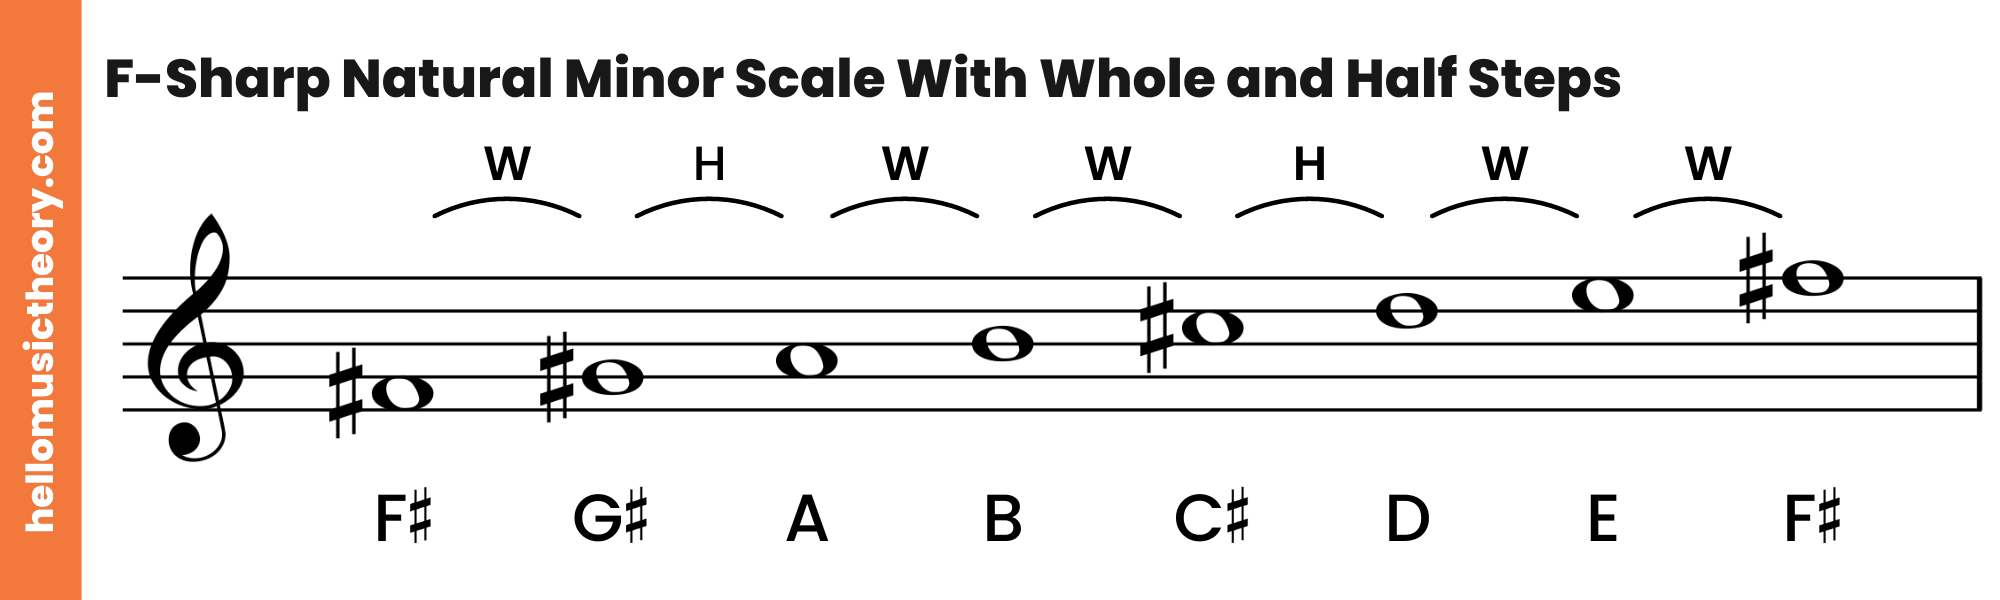 F-Sharp Natural Minor Scale Treble Clef Ascending With Whole and Half Steps